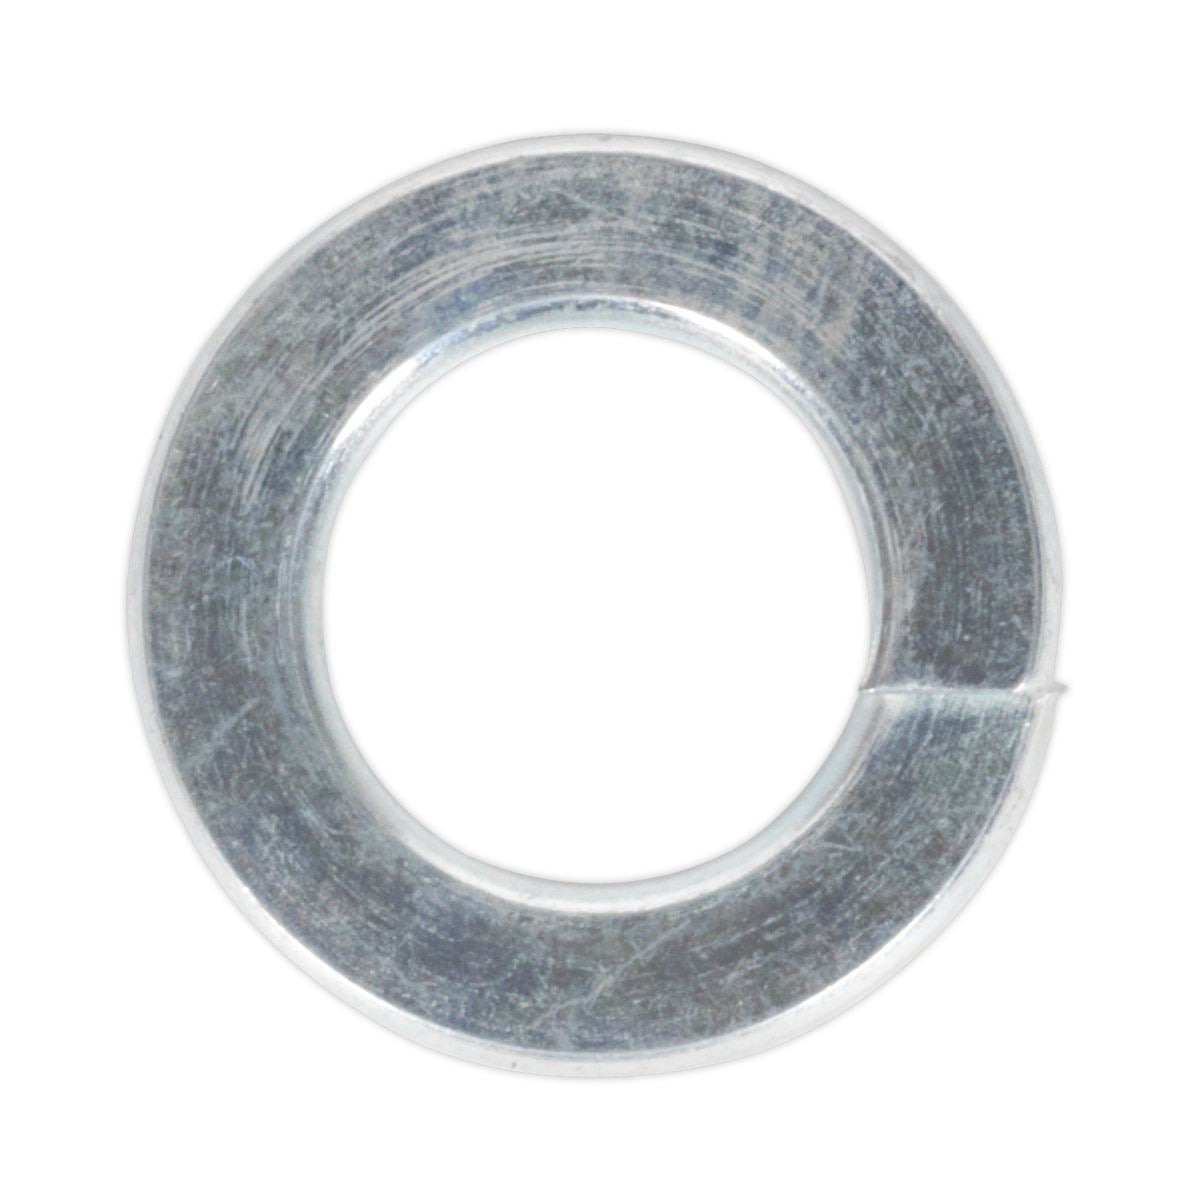 Sealey Spring Washer DIN 127B M8 Zinc Pack of 100